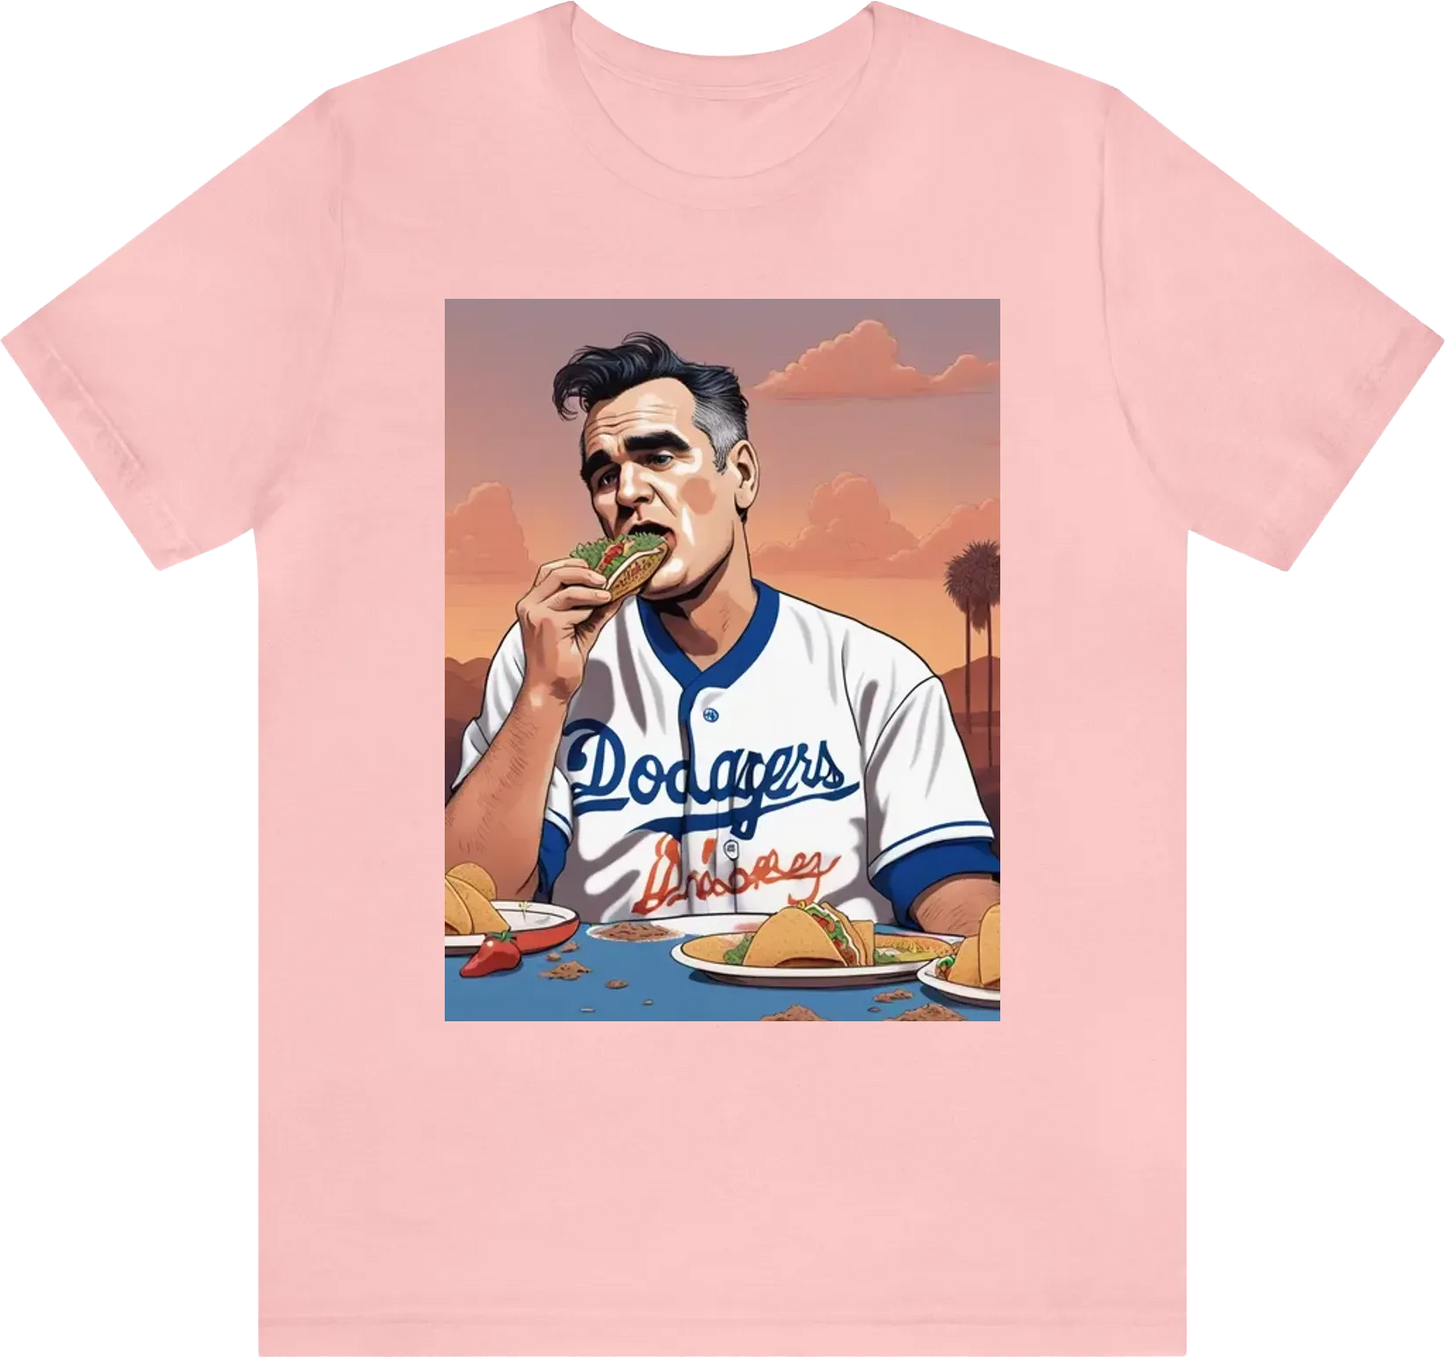 Morrissey wearing a los Angeles dodgers jersey eating a taco, 8k, illustrated